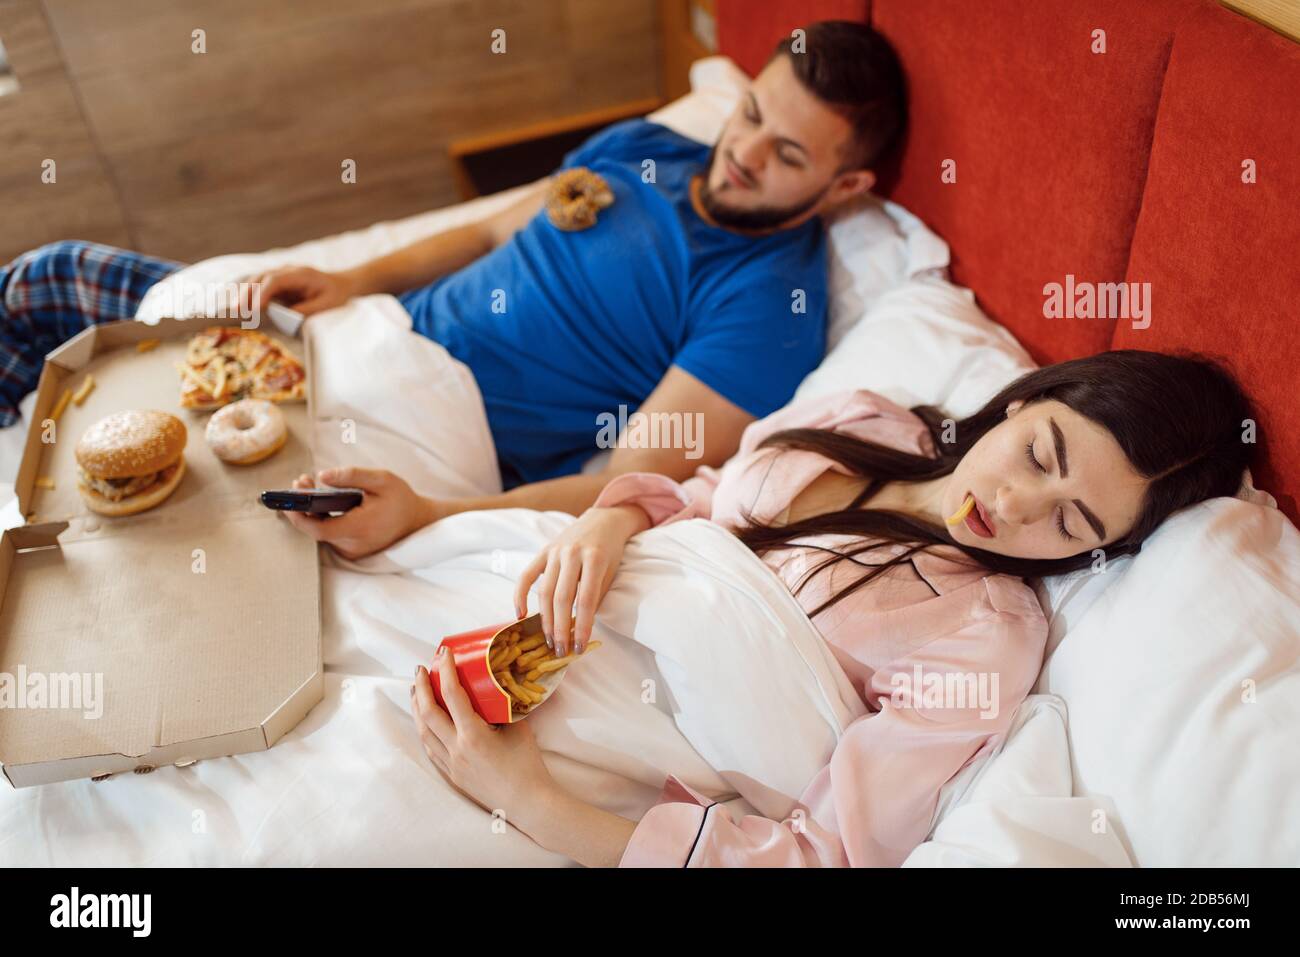 Couple eating in bed, bad relationship, problems, family quarrel, conflict of married man and woman